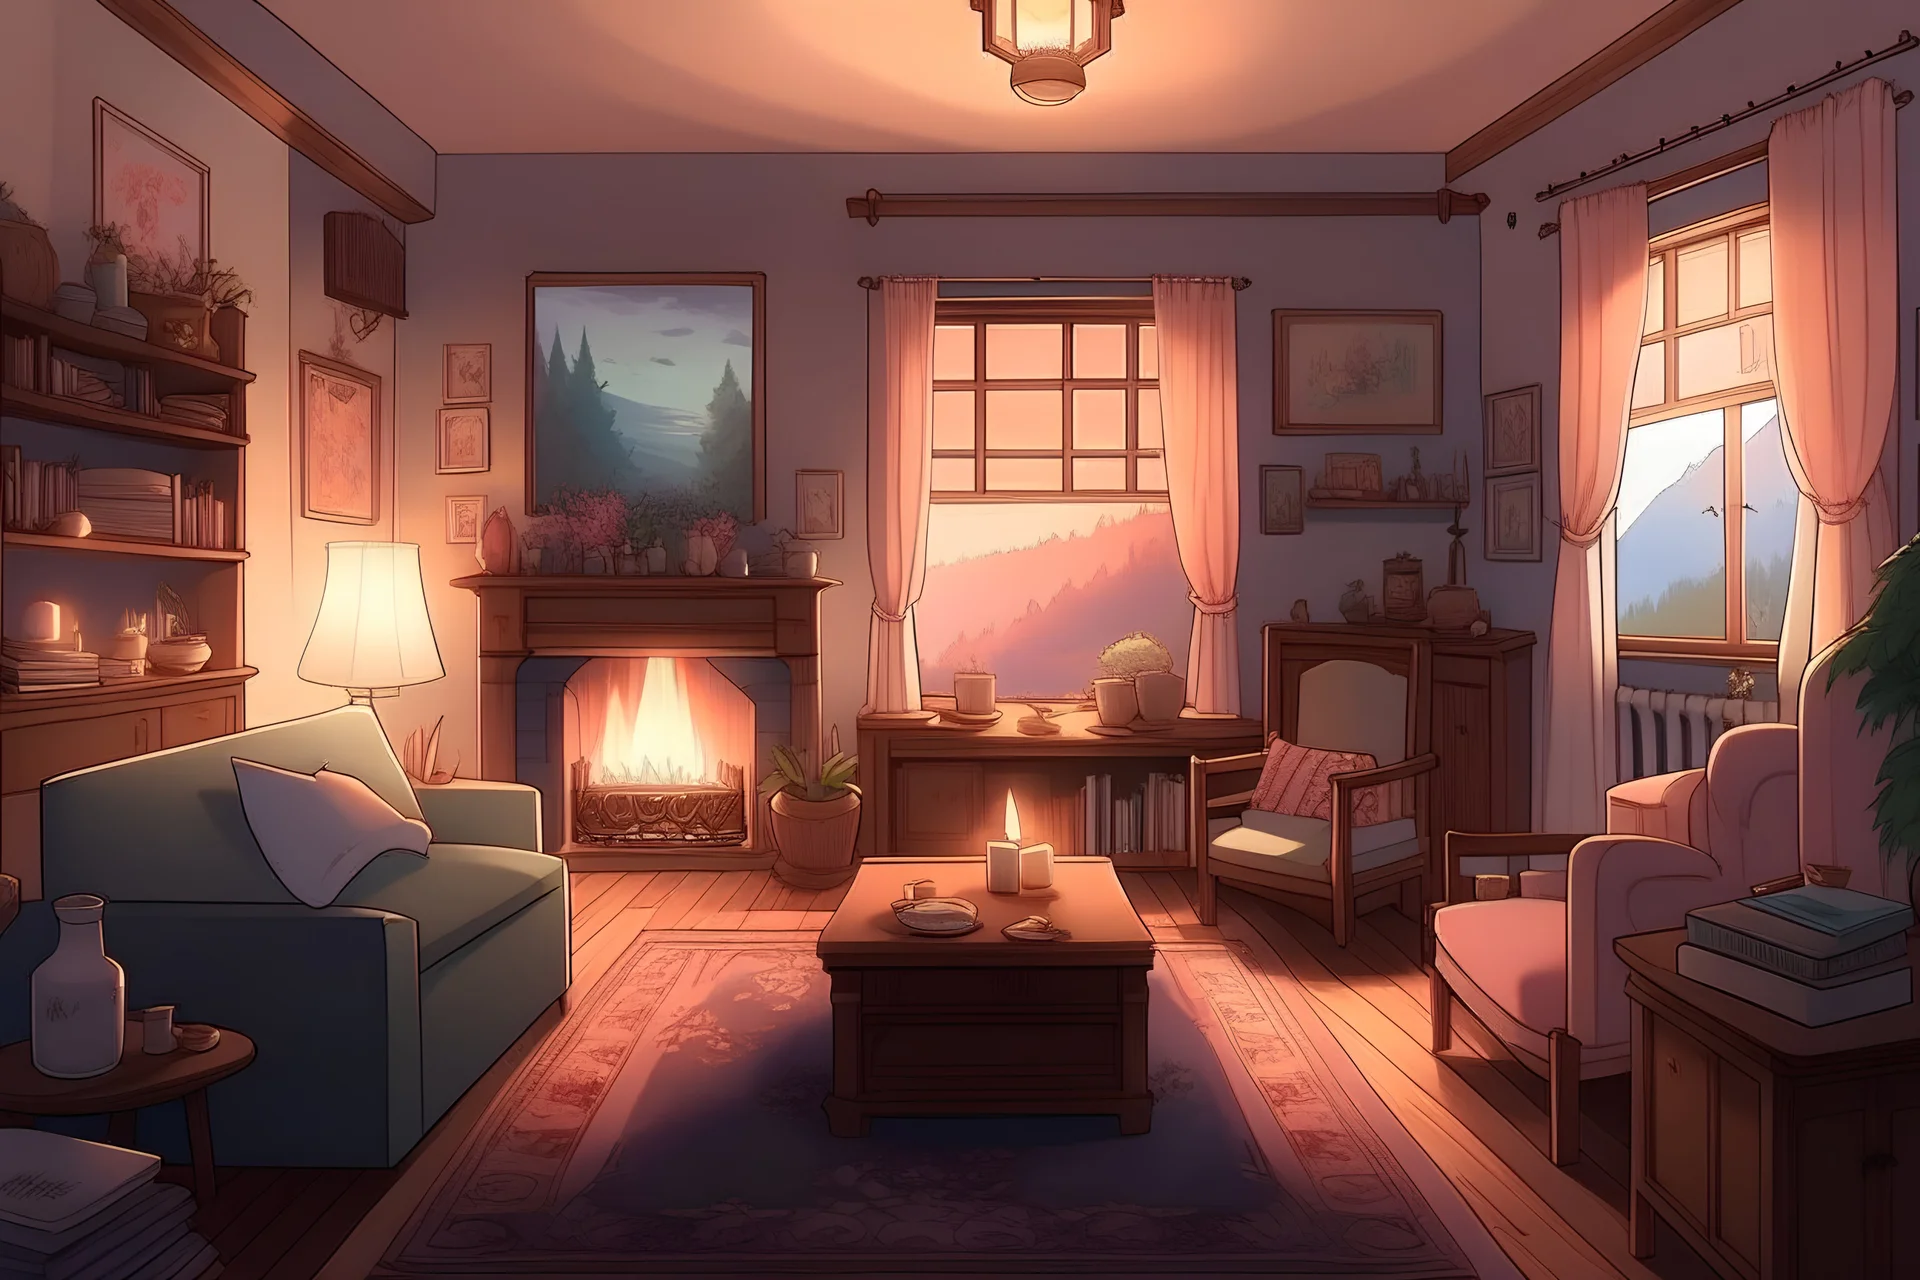 Craft a warm living room during night, with a fireplace, family photos, and soft, pastel hues. Include subtle horror elements, such as flickering lights casting eerie shadows, family photos with faces that distort at times, or a painting that gradually changes over time. anime visual novel style